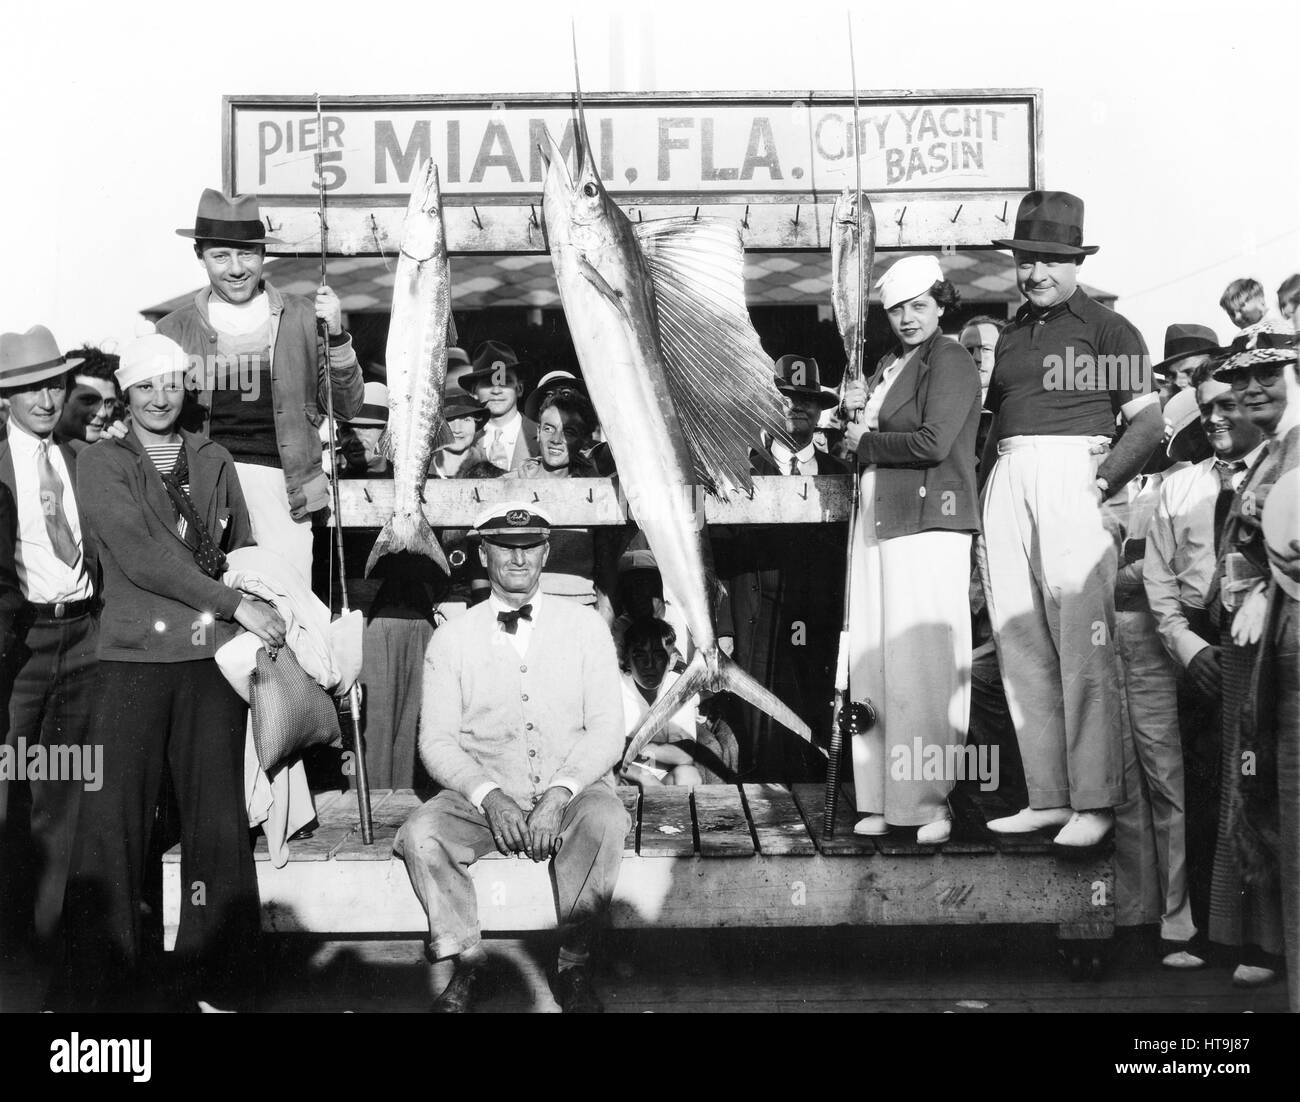 'Miami, FLA.: Freeman Gosden and Charles Correlle, known better over the radio as 'Amos N Andy,' are vacationing at Miami, Fla. Photo shows them with their wives at the city docks, following a thrilling fishing trip during which time they caught a giant sail fish, a barracuda and dolphin. (left) Mr. and Mrs. Amos. (Right Mr. and Mrs. Andy).' Stock Photo